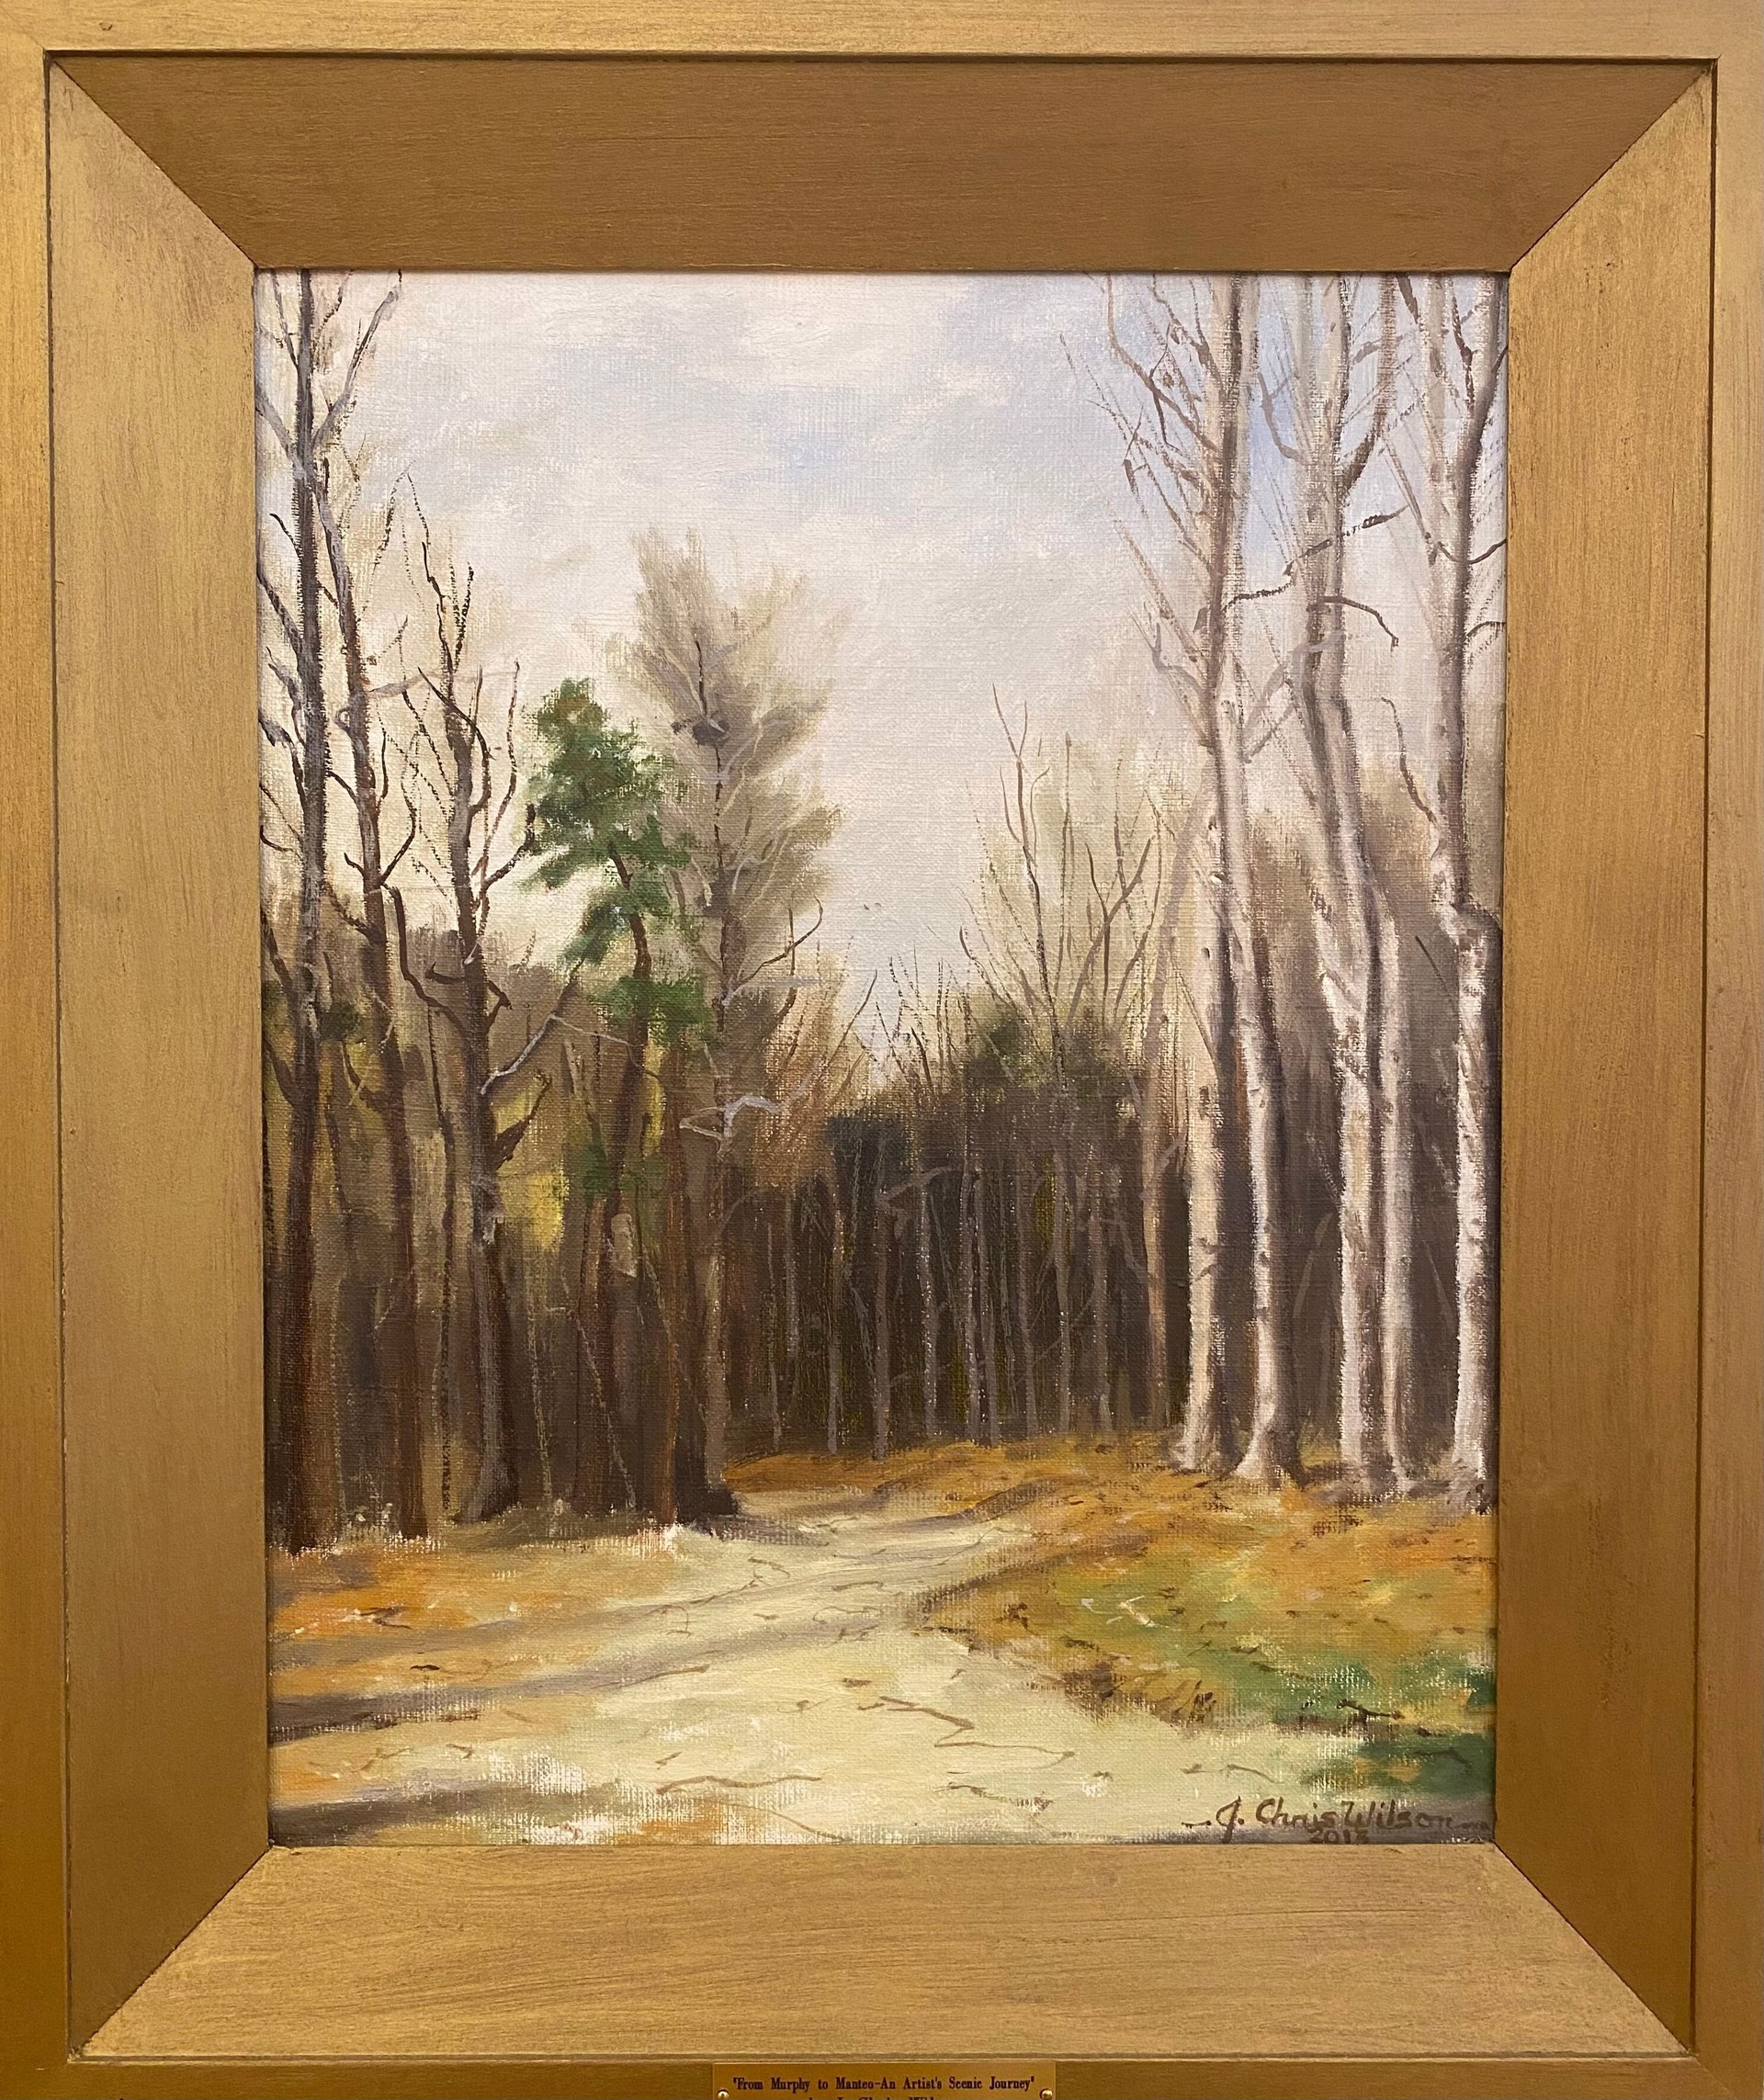 Camp Road, Near Statesville 21x25 750 by J. Chris Wilson